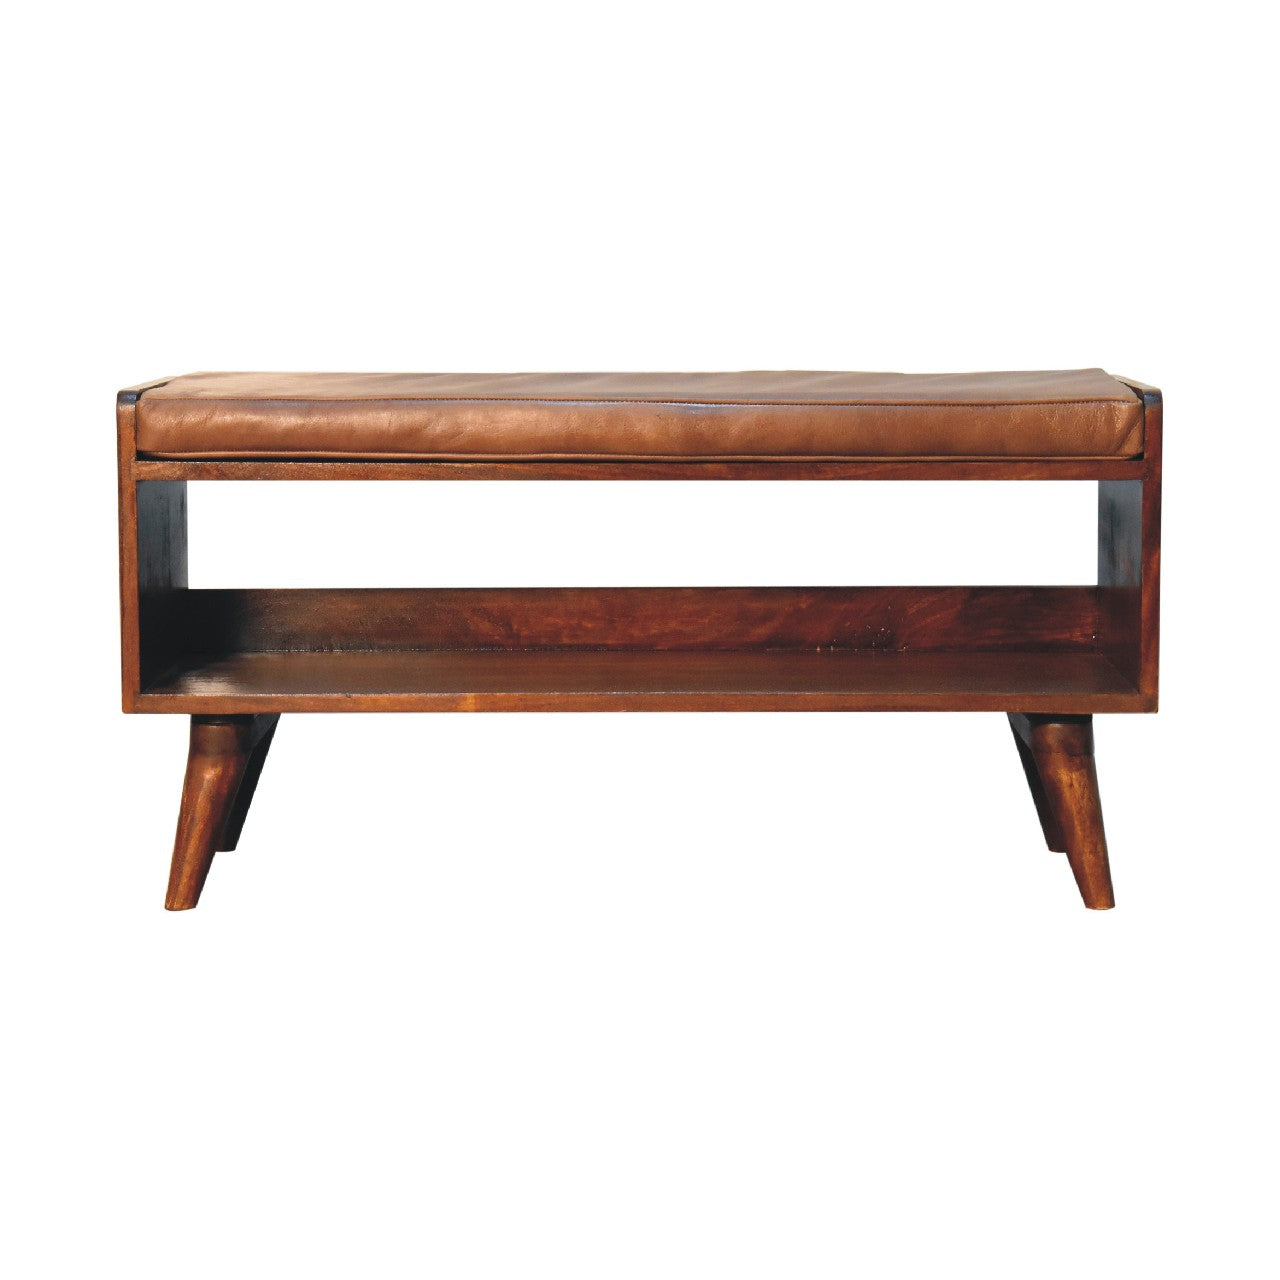 View Chestnut Bench with Brown Leather Seatpad information